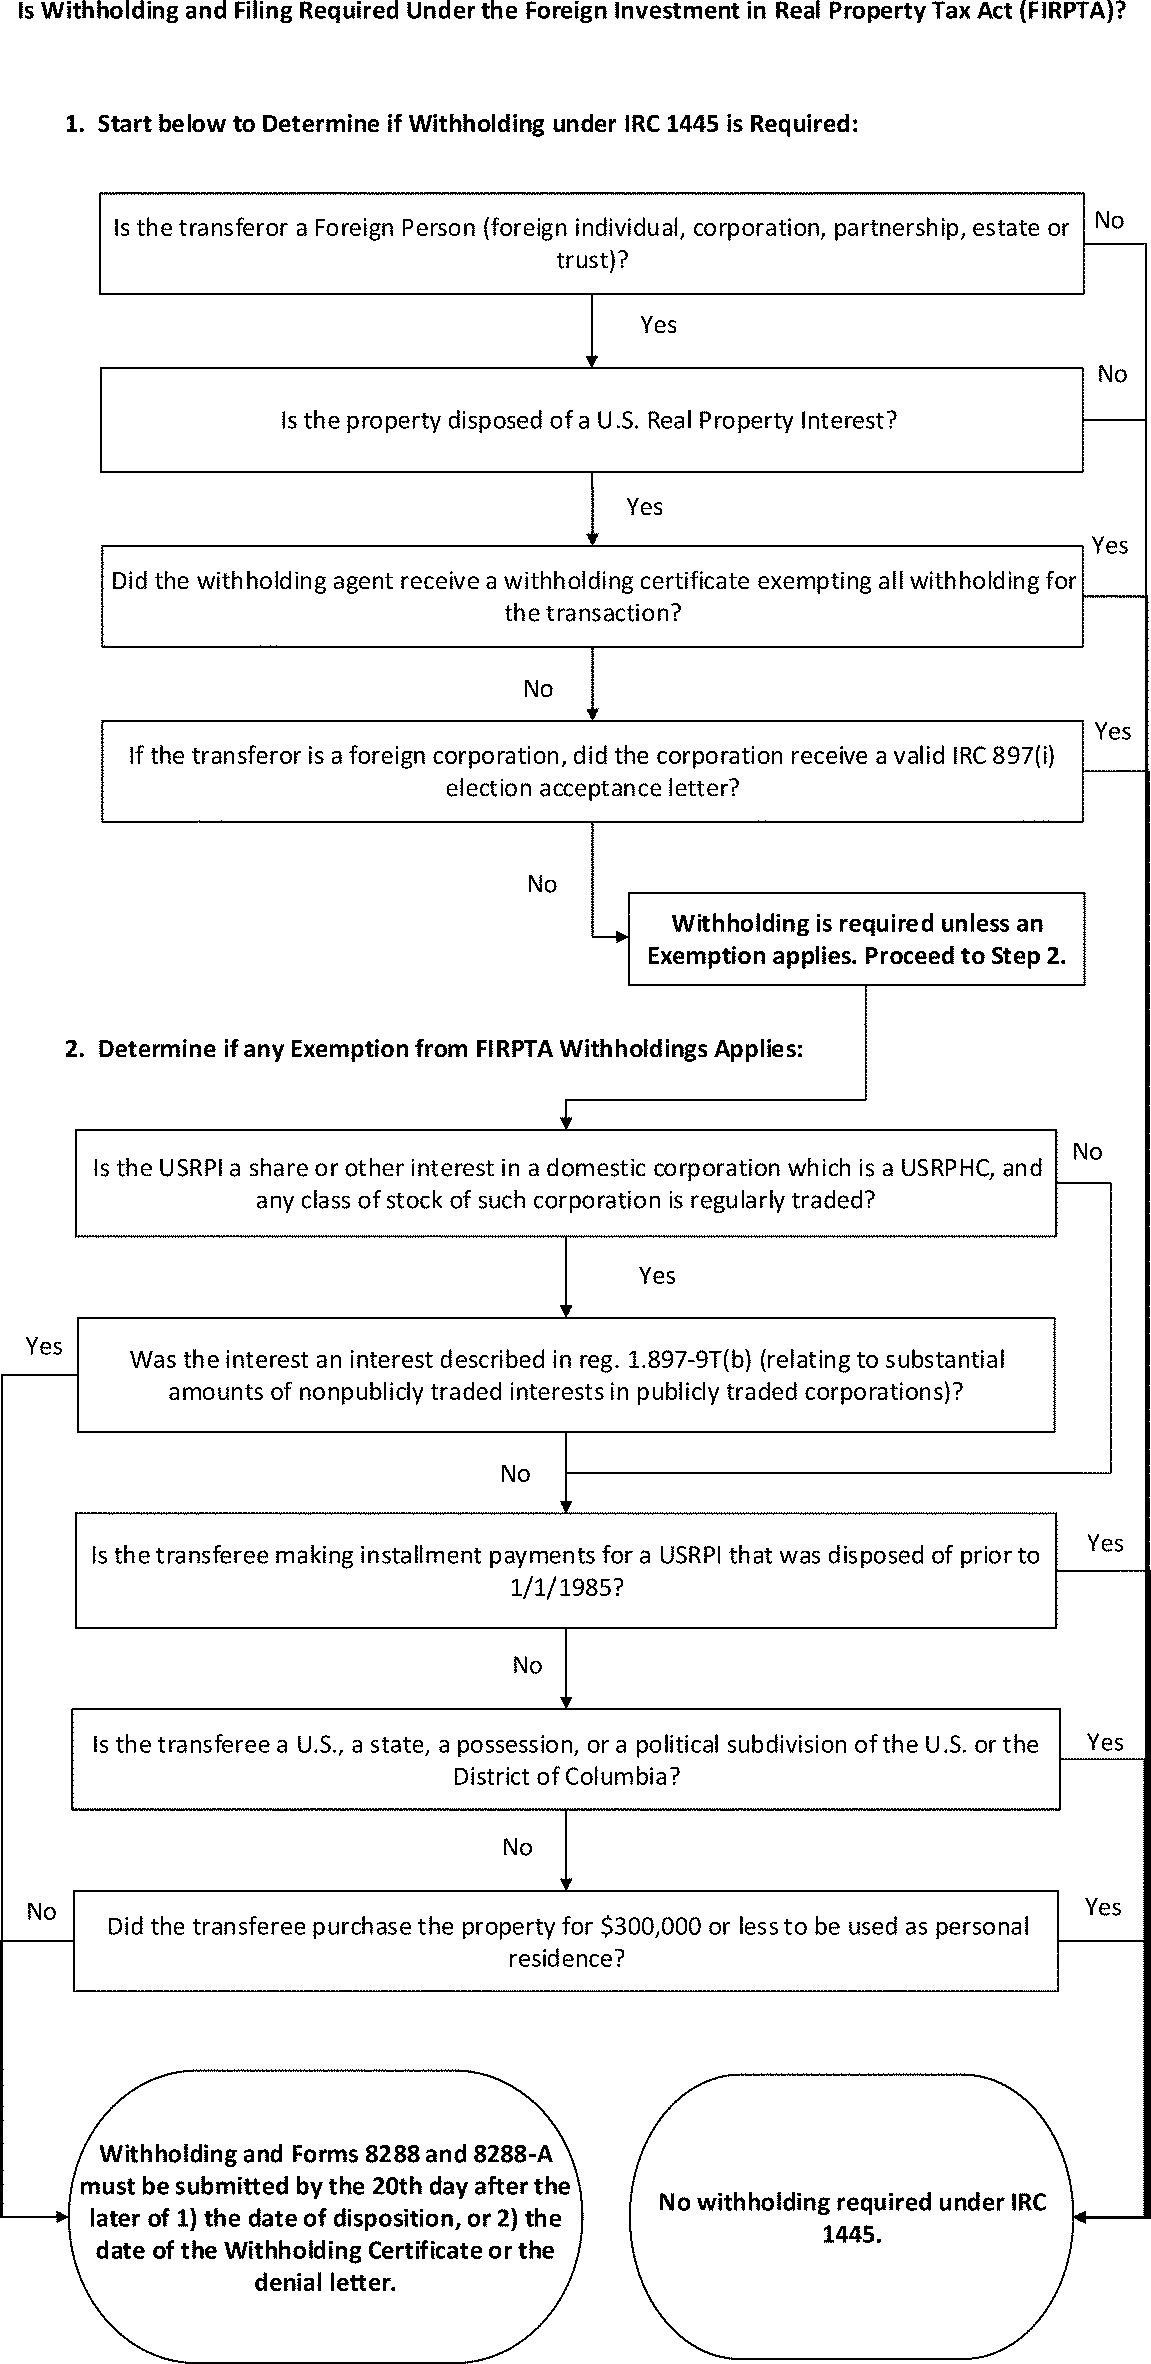 FIRPTA chart from the IRS